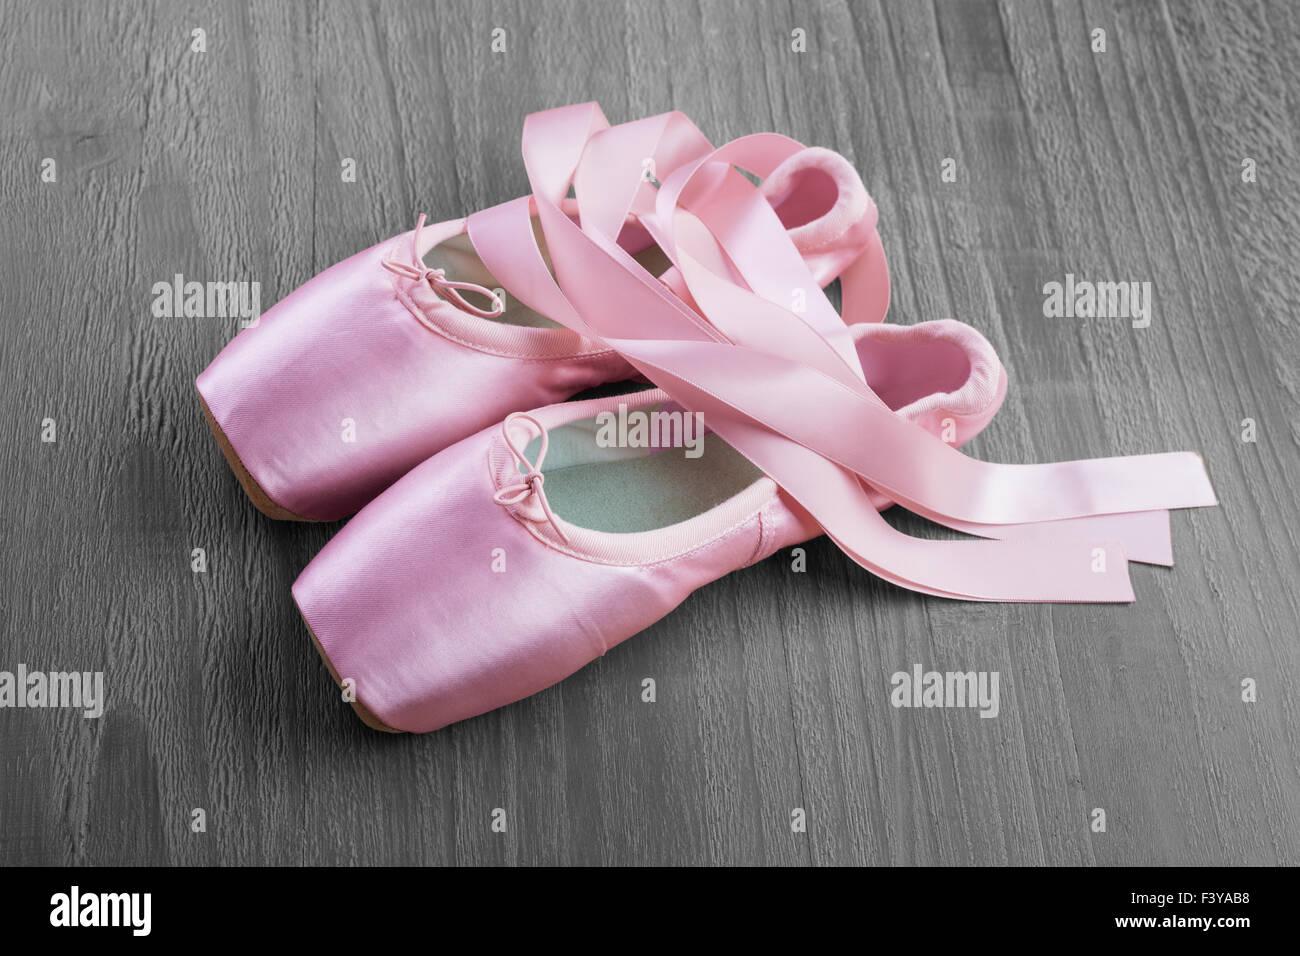 new pink ballet pointe shoes Stock Photo - Alamy